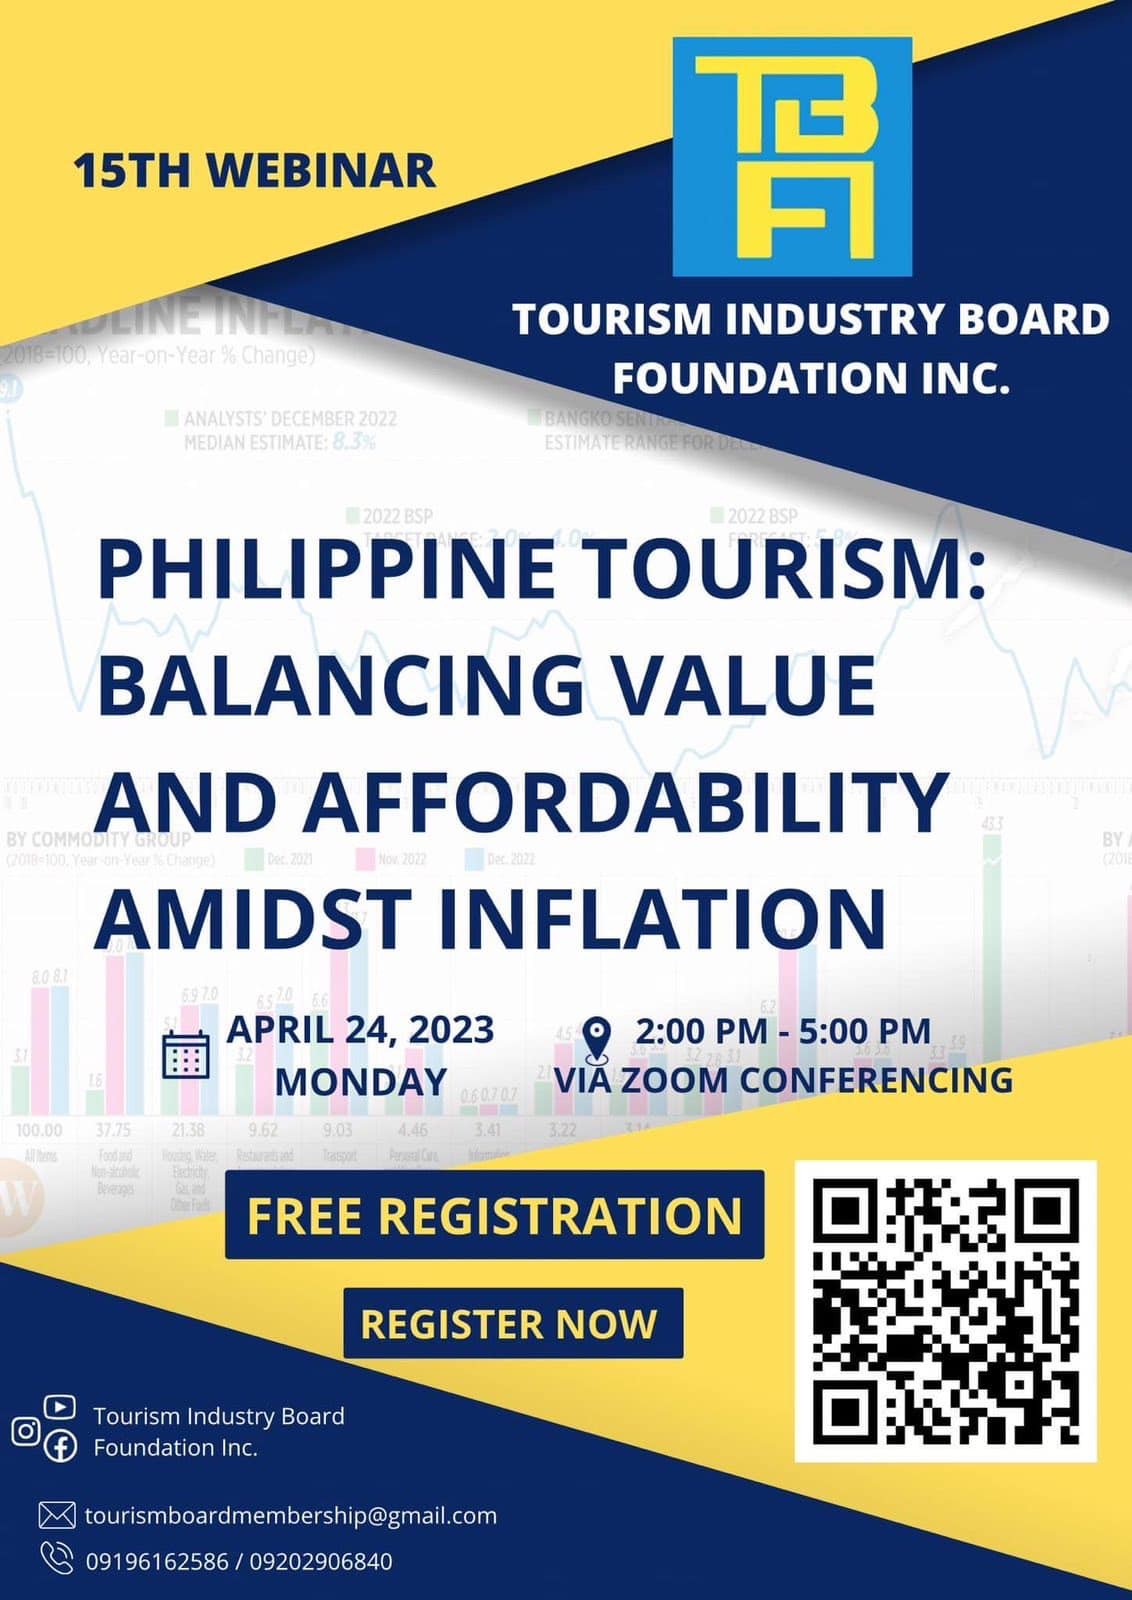 PHILIPPINE TOURISM: Balancing Value and Affordability Amidst Inflation